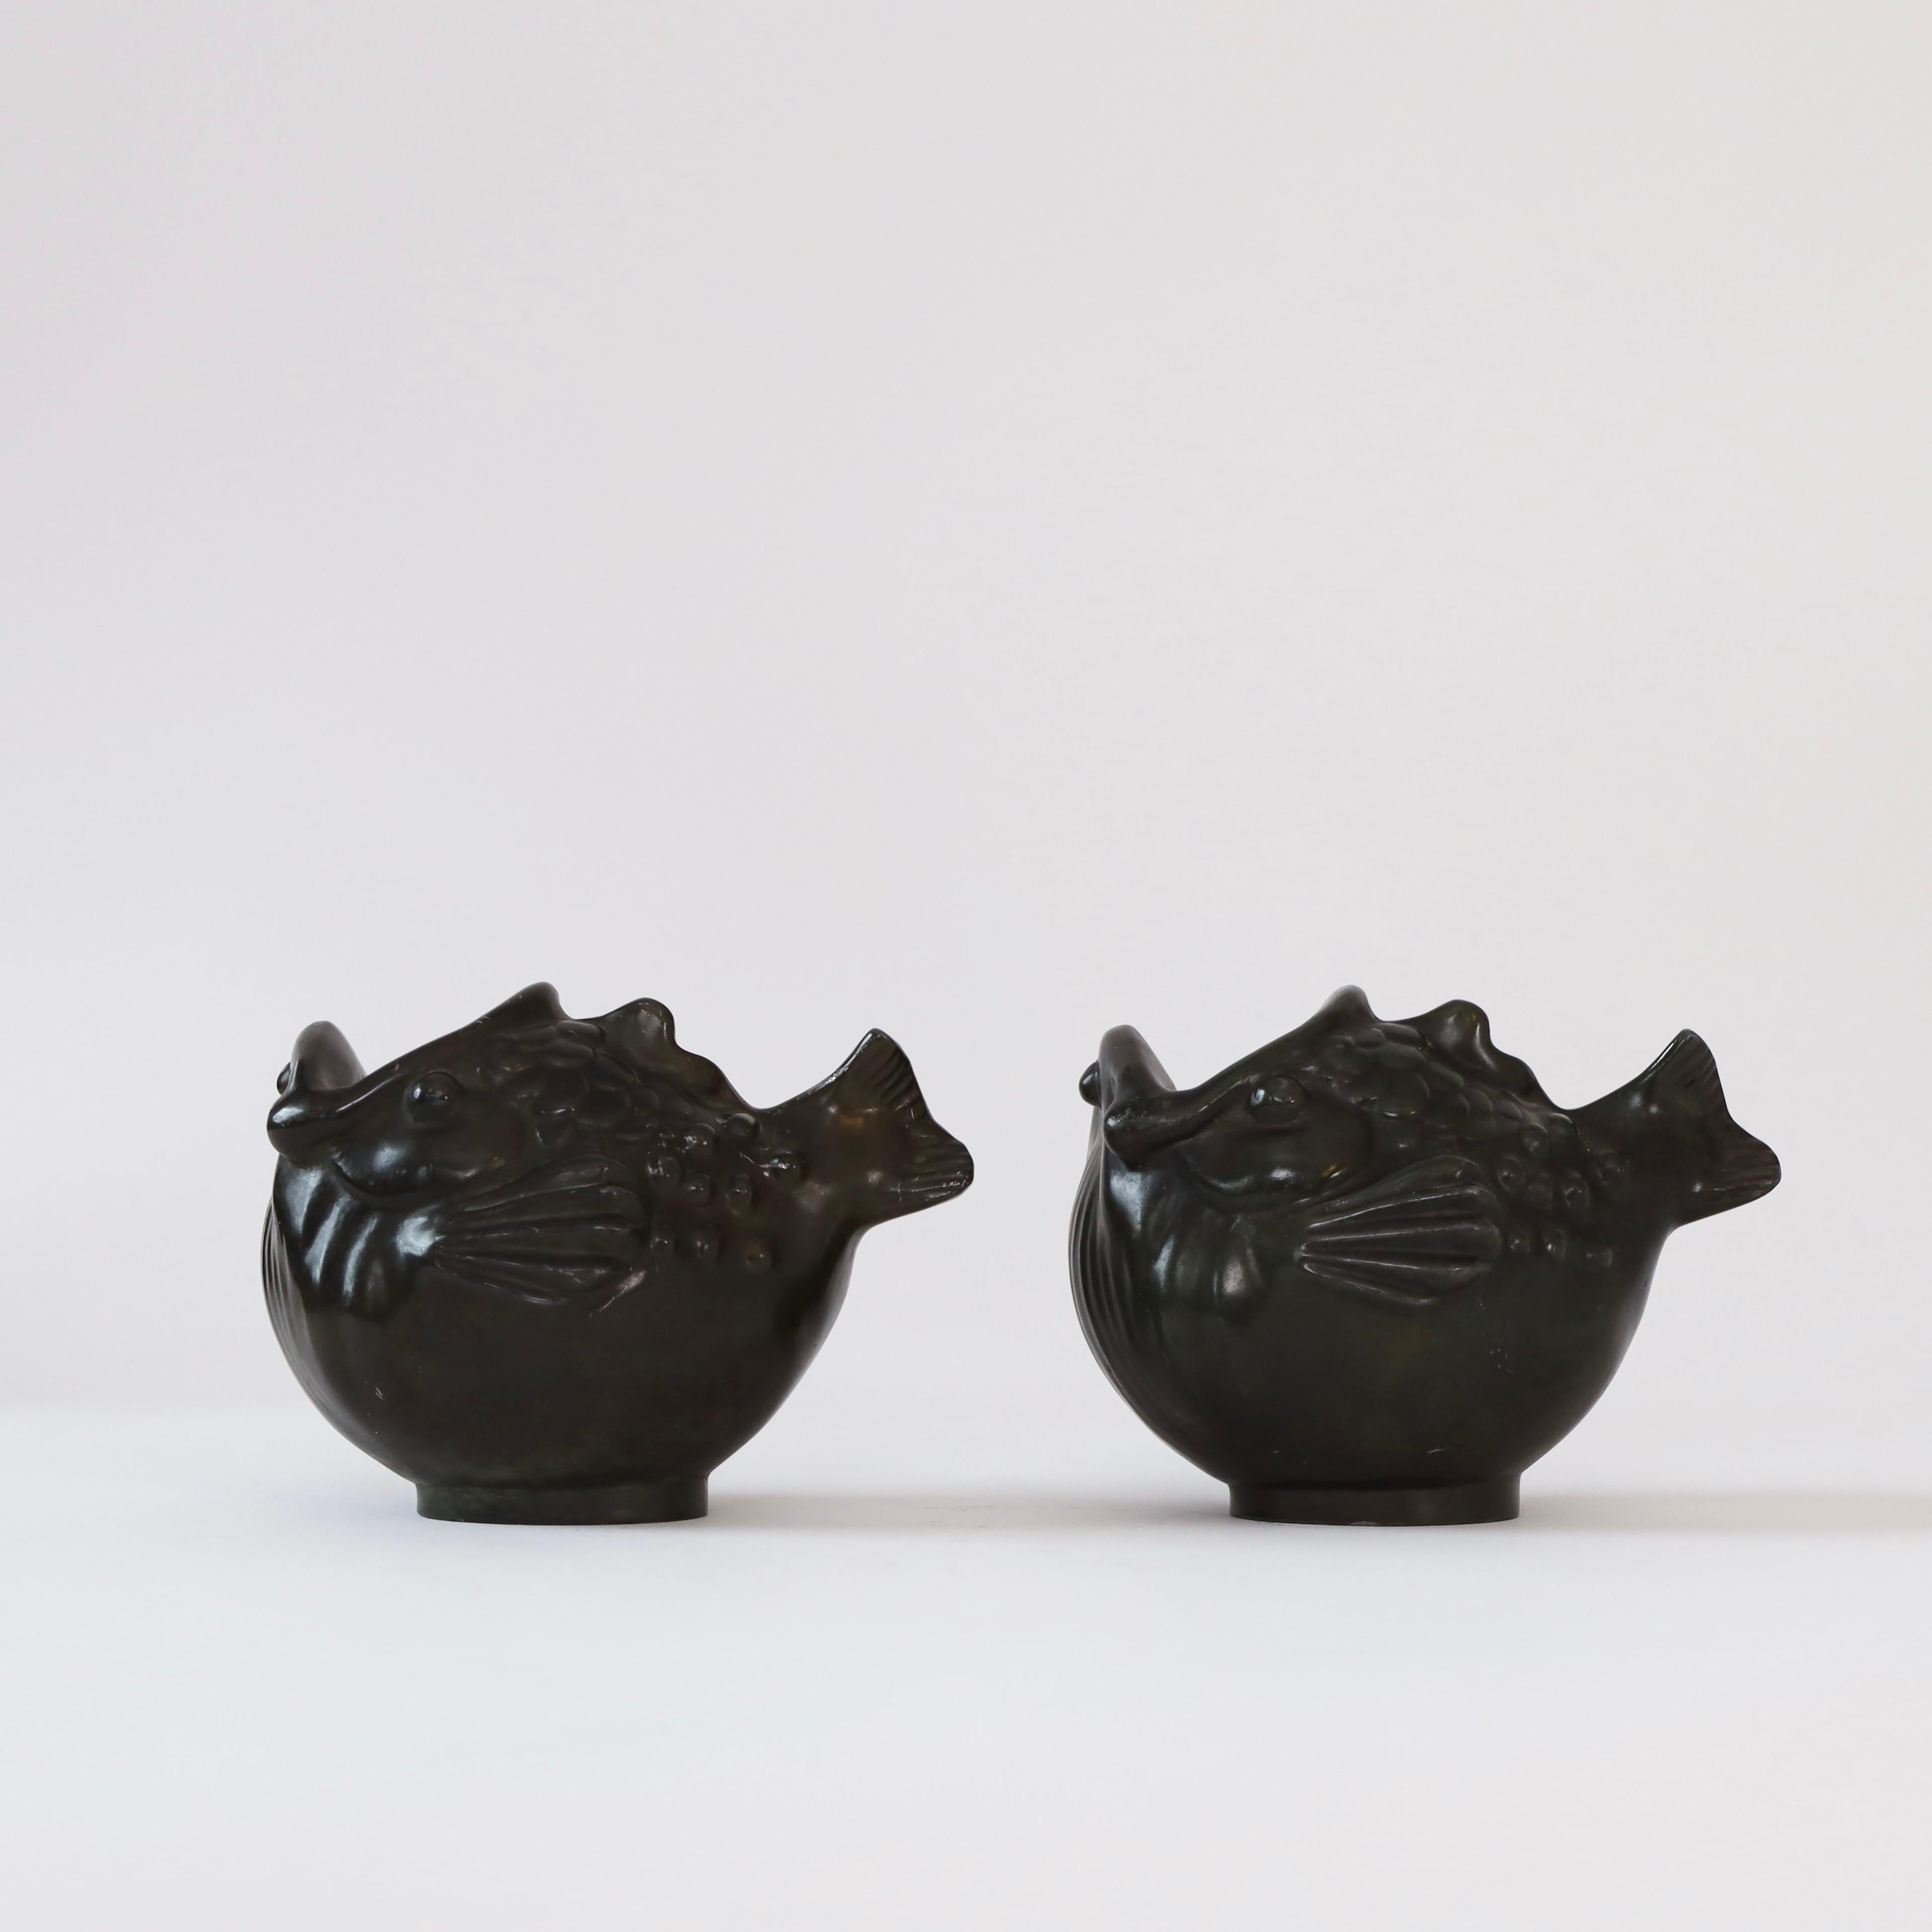 Mid-20th Century Pair of Fish-shaped Art Deco Vases by Just Andersen, 1930s, Denmark For Sale